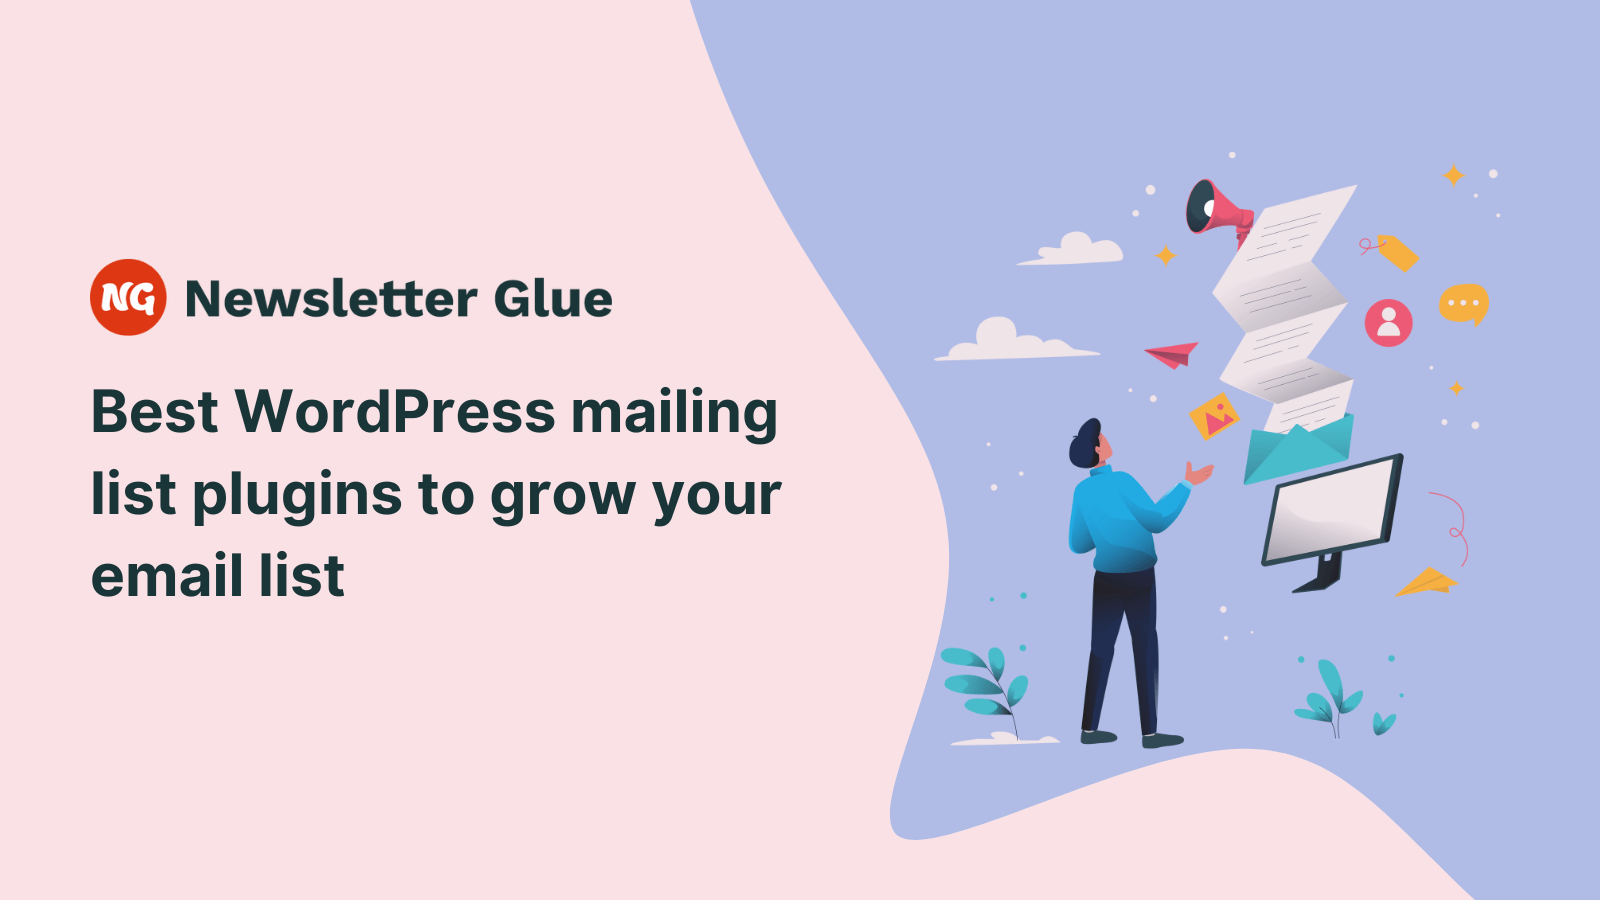 Best WordPress mailing list plugins to grow your email list